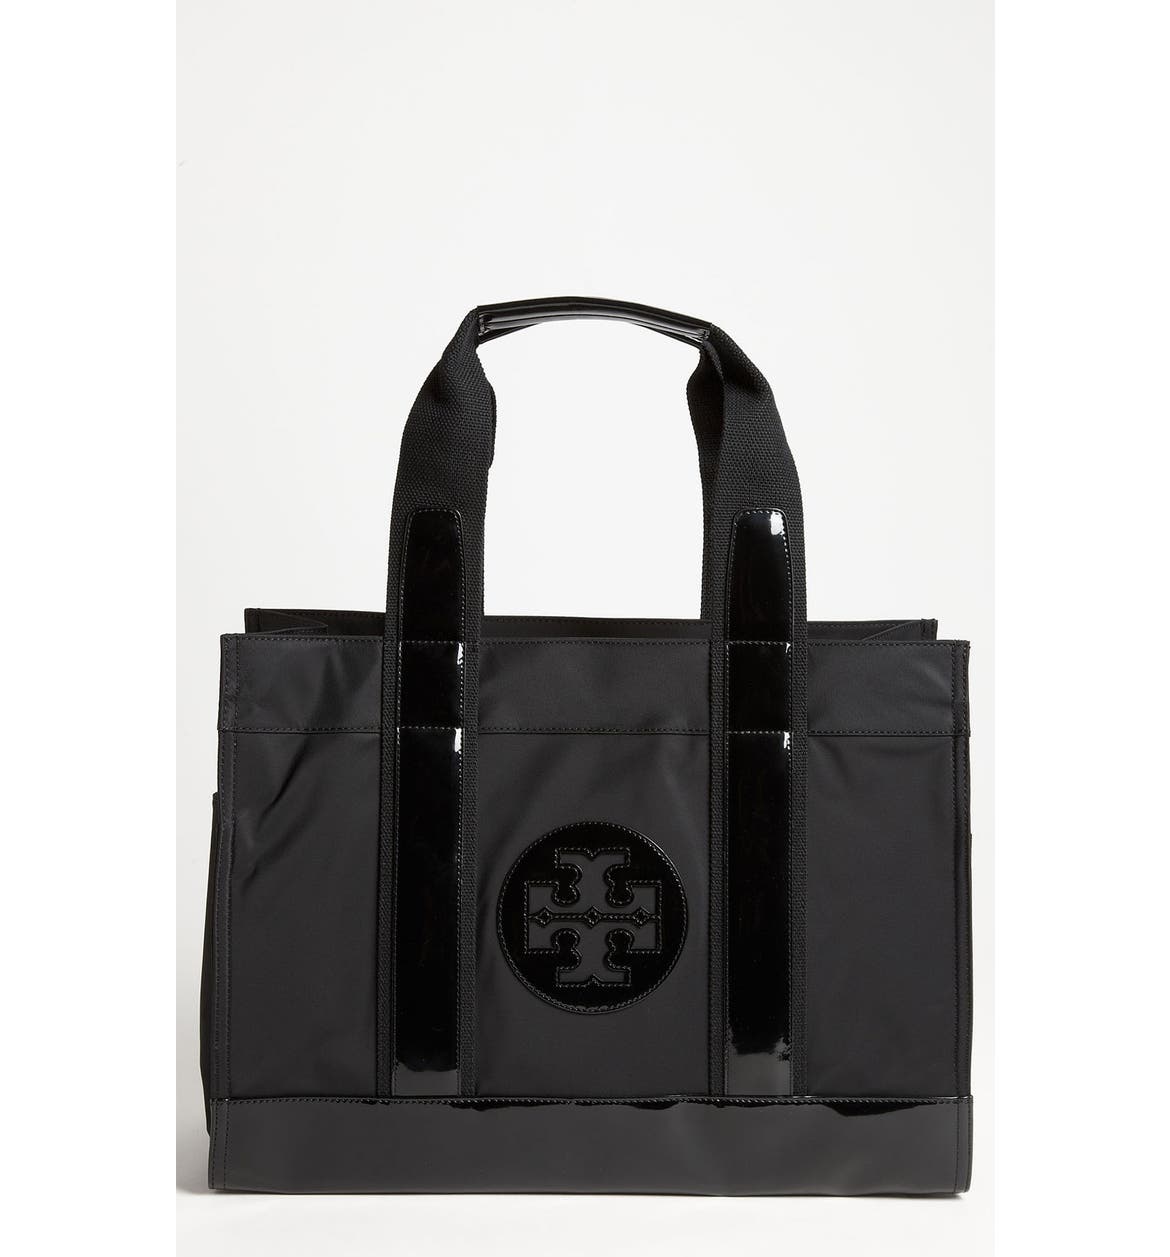 Tory Burch 'Tory' Nylon Tote, Large | Nordstrom